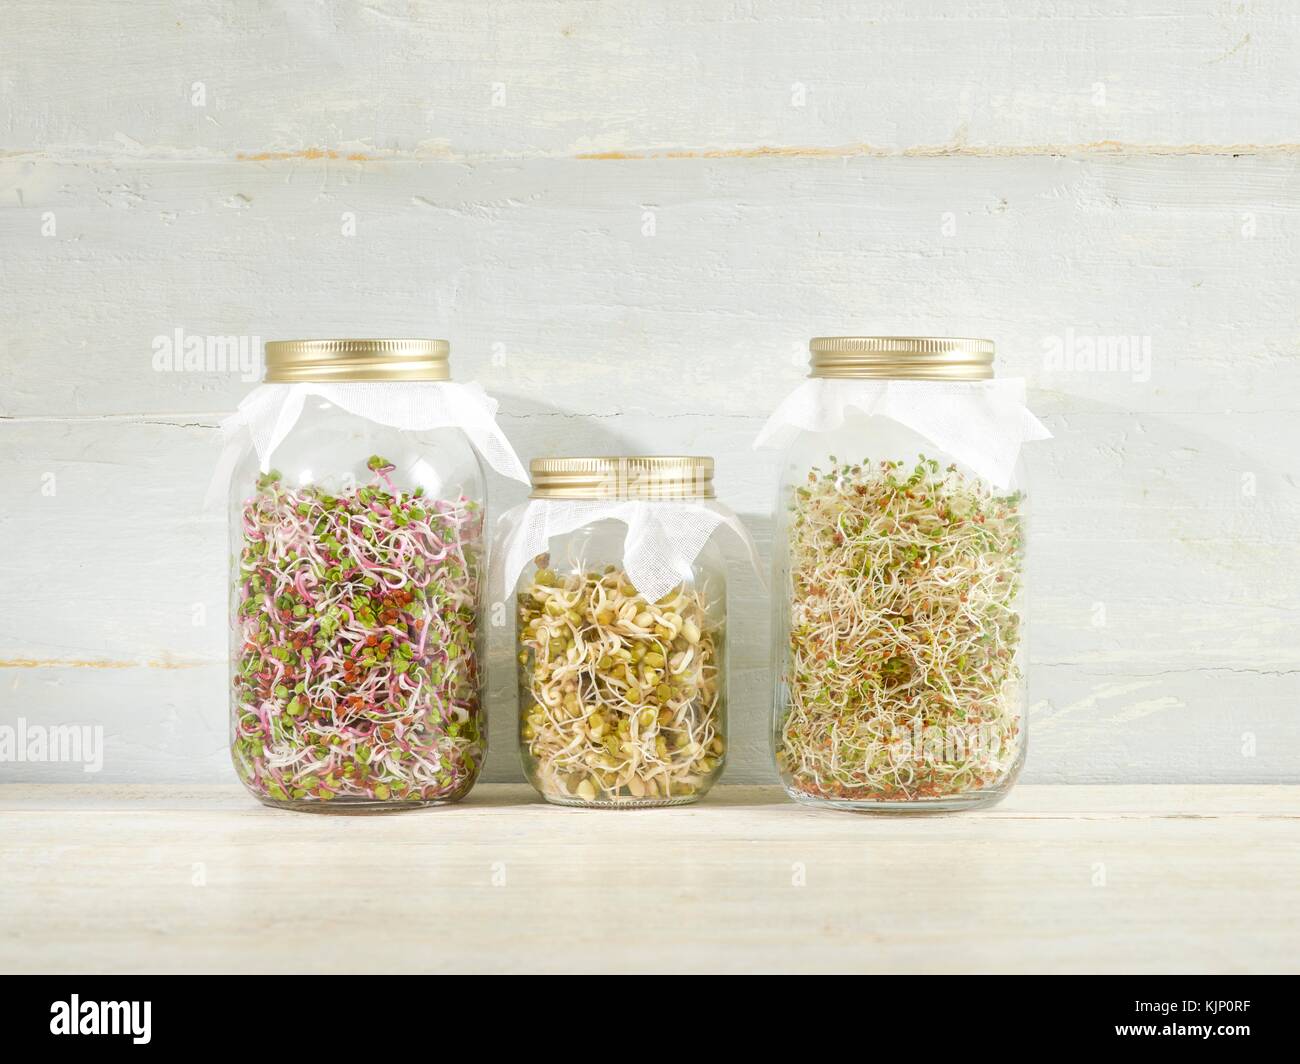 Sprouting beans in jars. Stock Photo